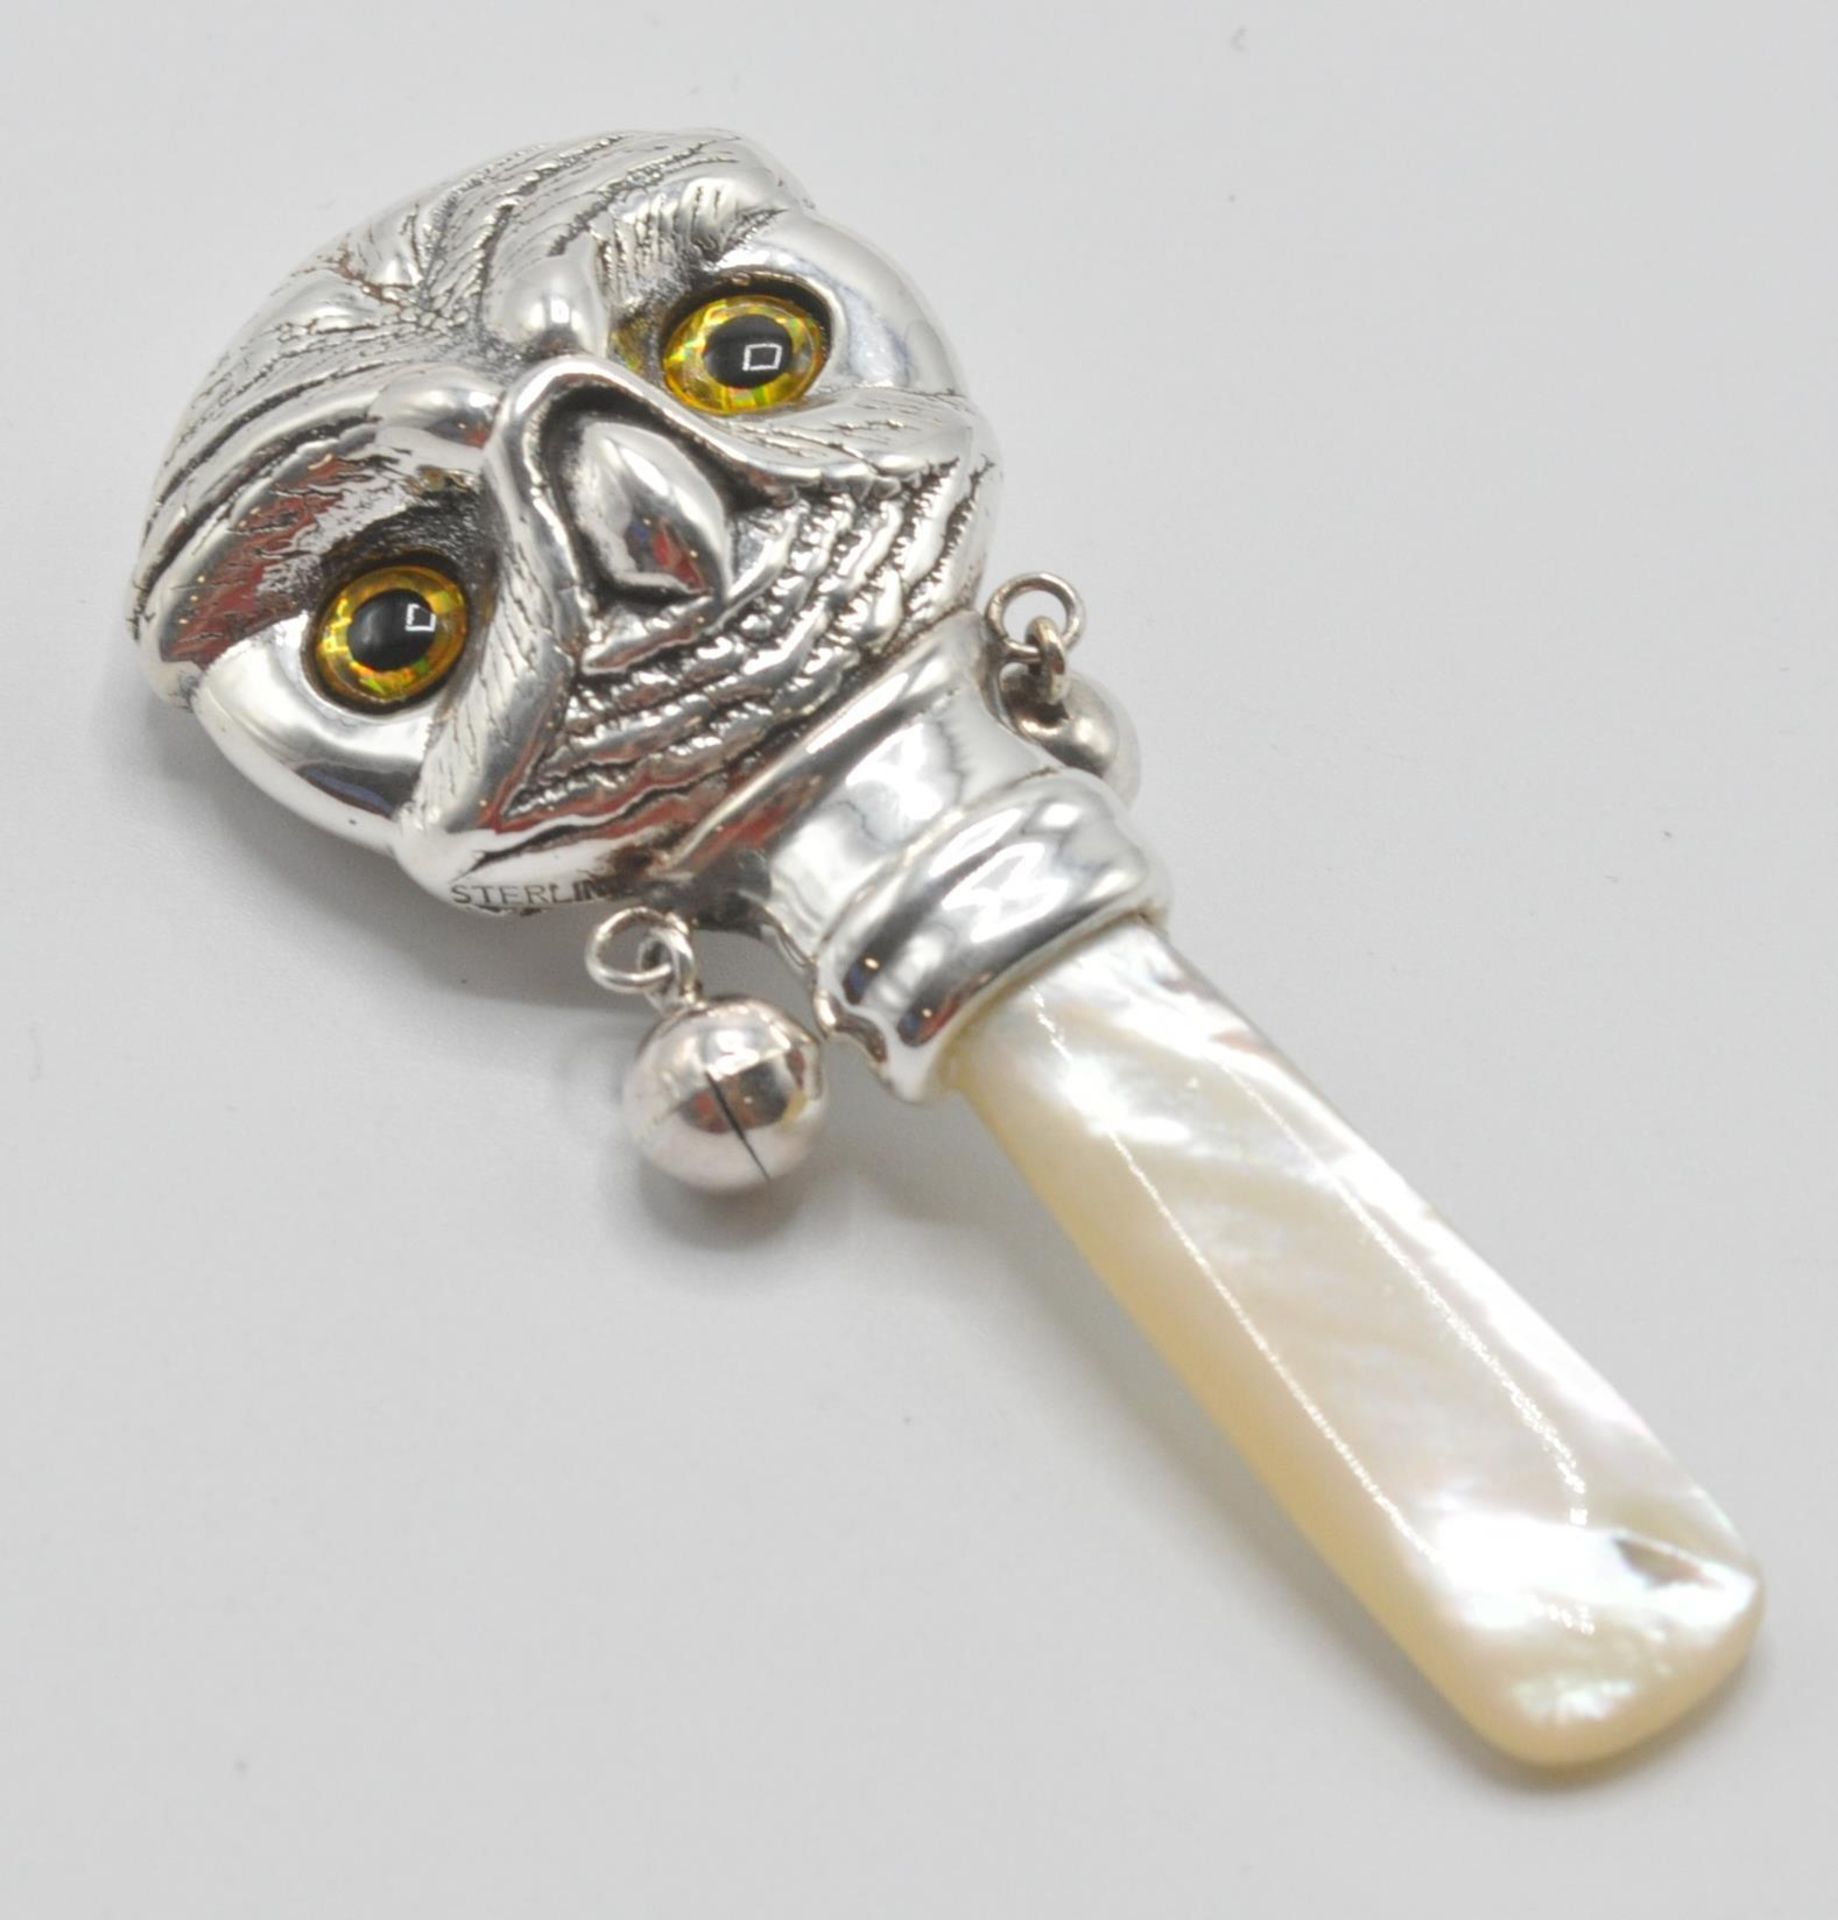 A silver babies / childs rattle in the form of an owl with yellow and black glass eyes having a